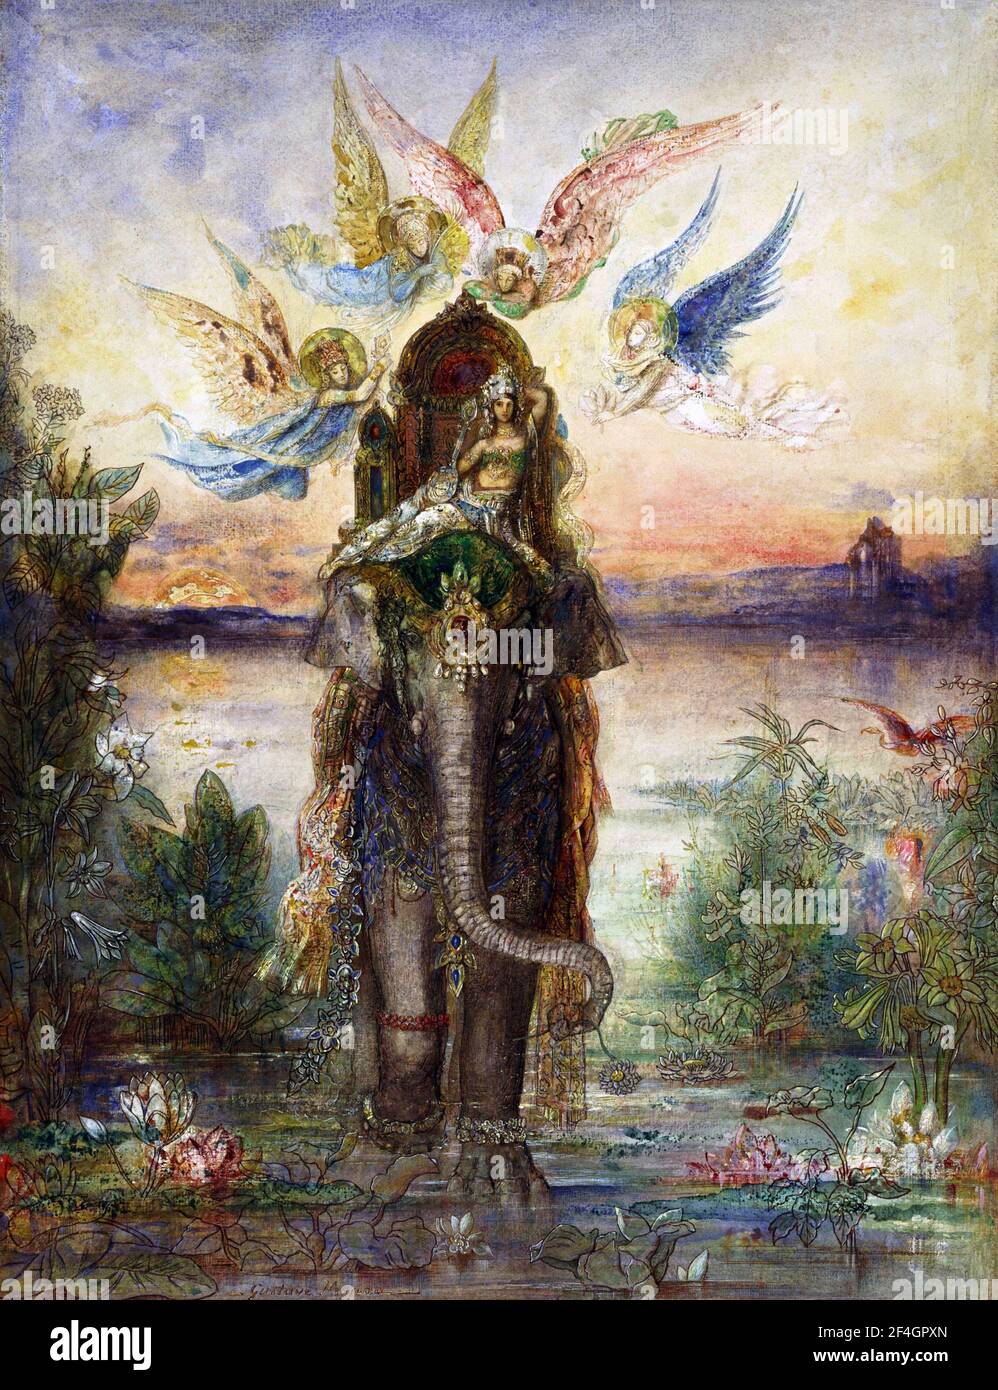 Gustave Moreau. Painting entitled 'The Sacred Elephant' by the French symbolist painter, Gustave Moreau (1826-1898), watercolour and gouache on paper, 1882 Stock Photo